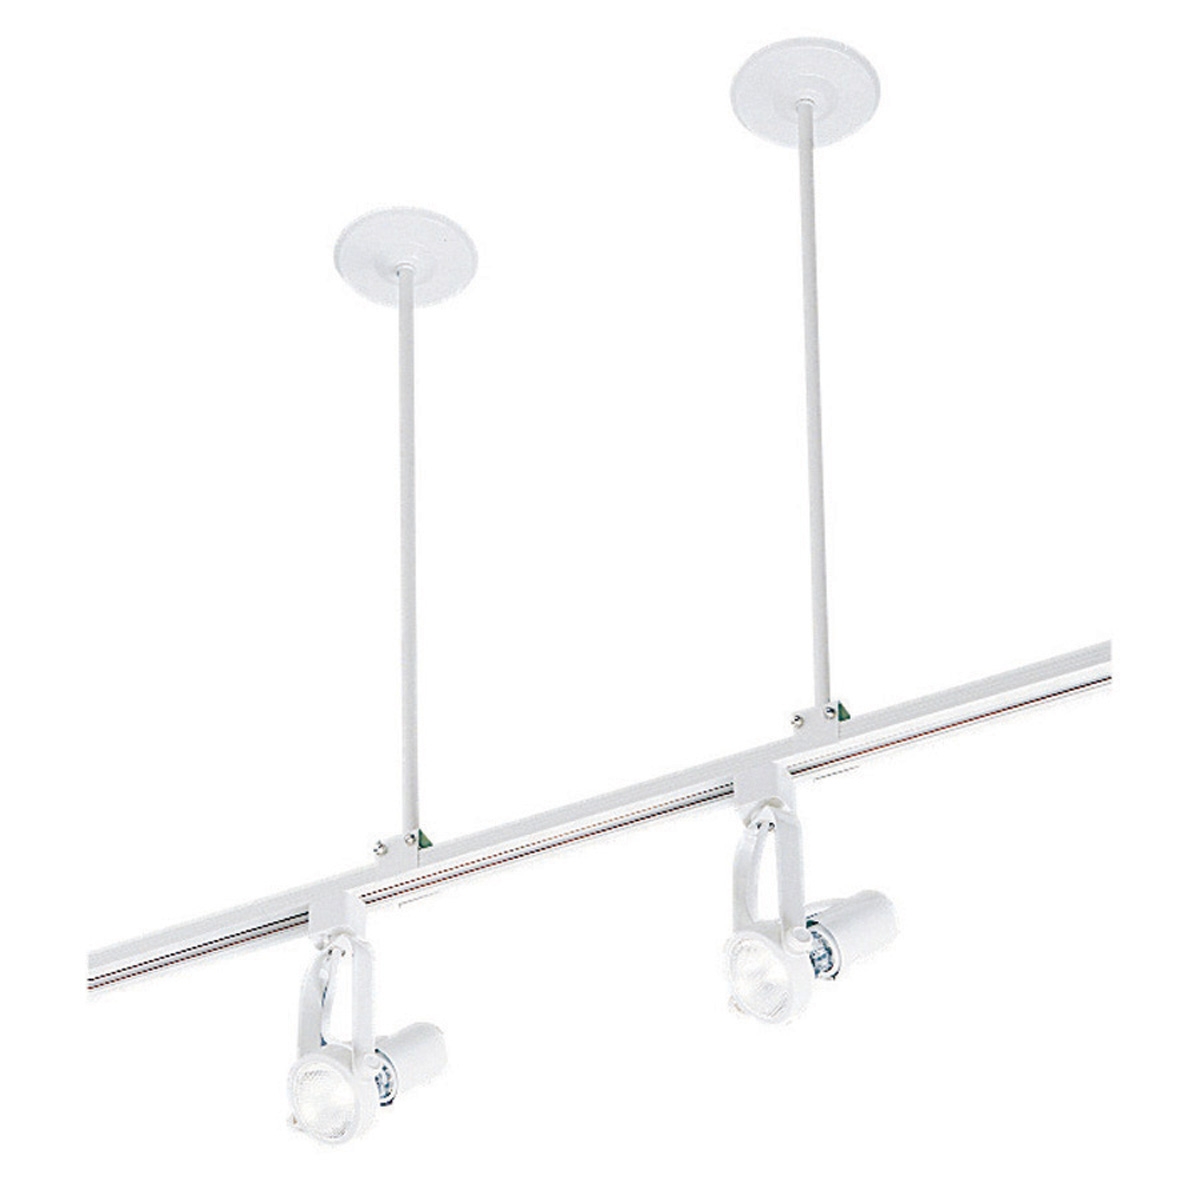 Permalink to Suspended Ceiling Light Fixture Bracket